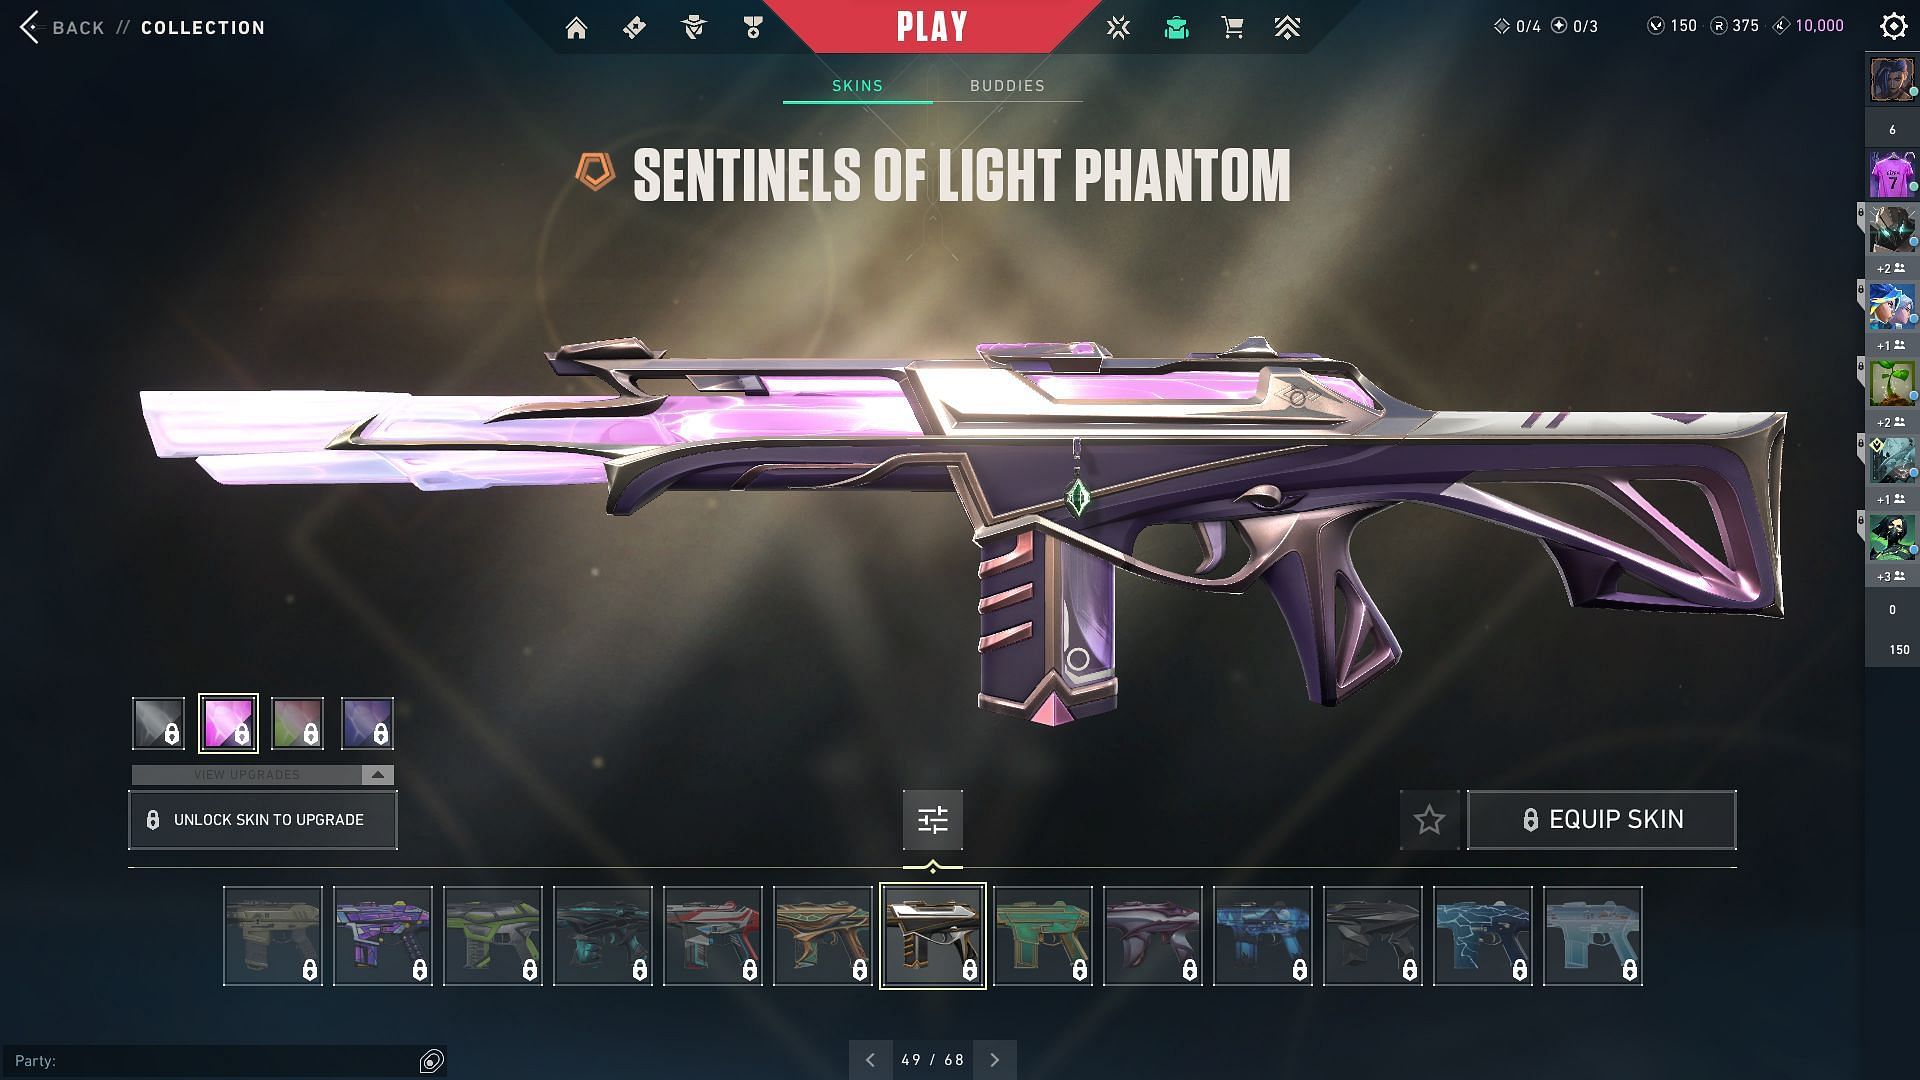 Sentinels of Light Phantom is a must-have skin for the new controller (Image via Riot)